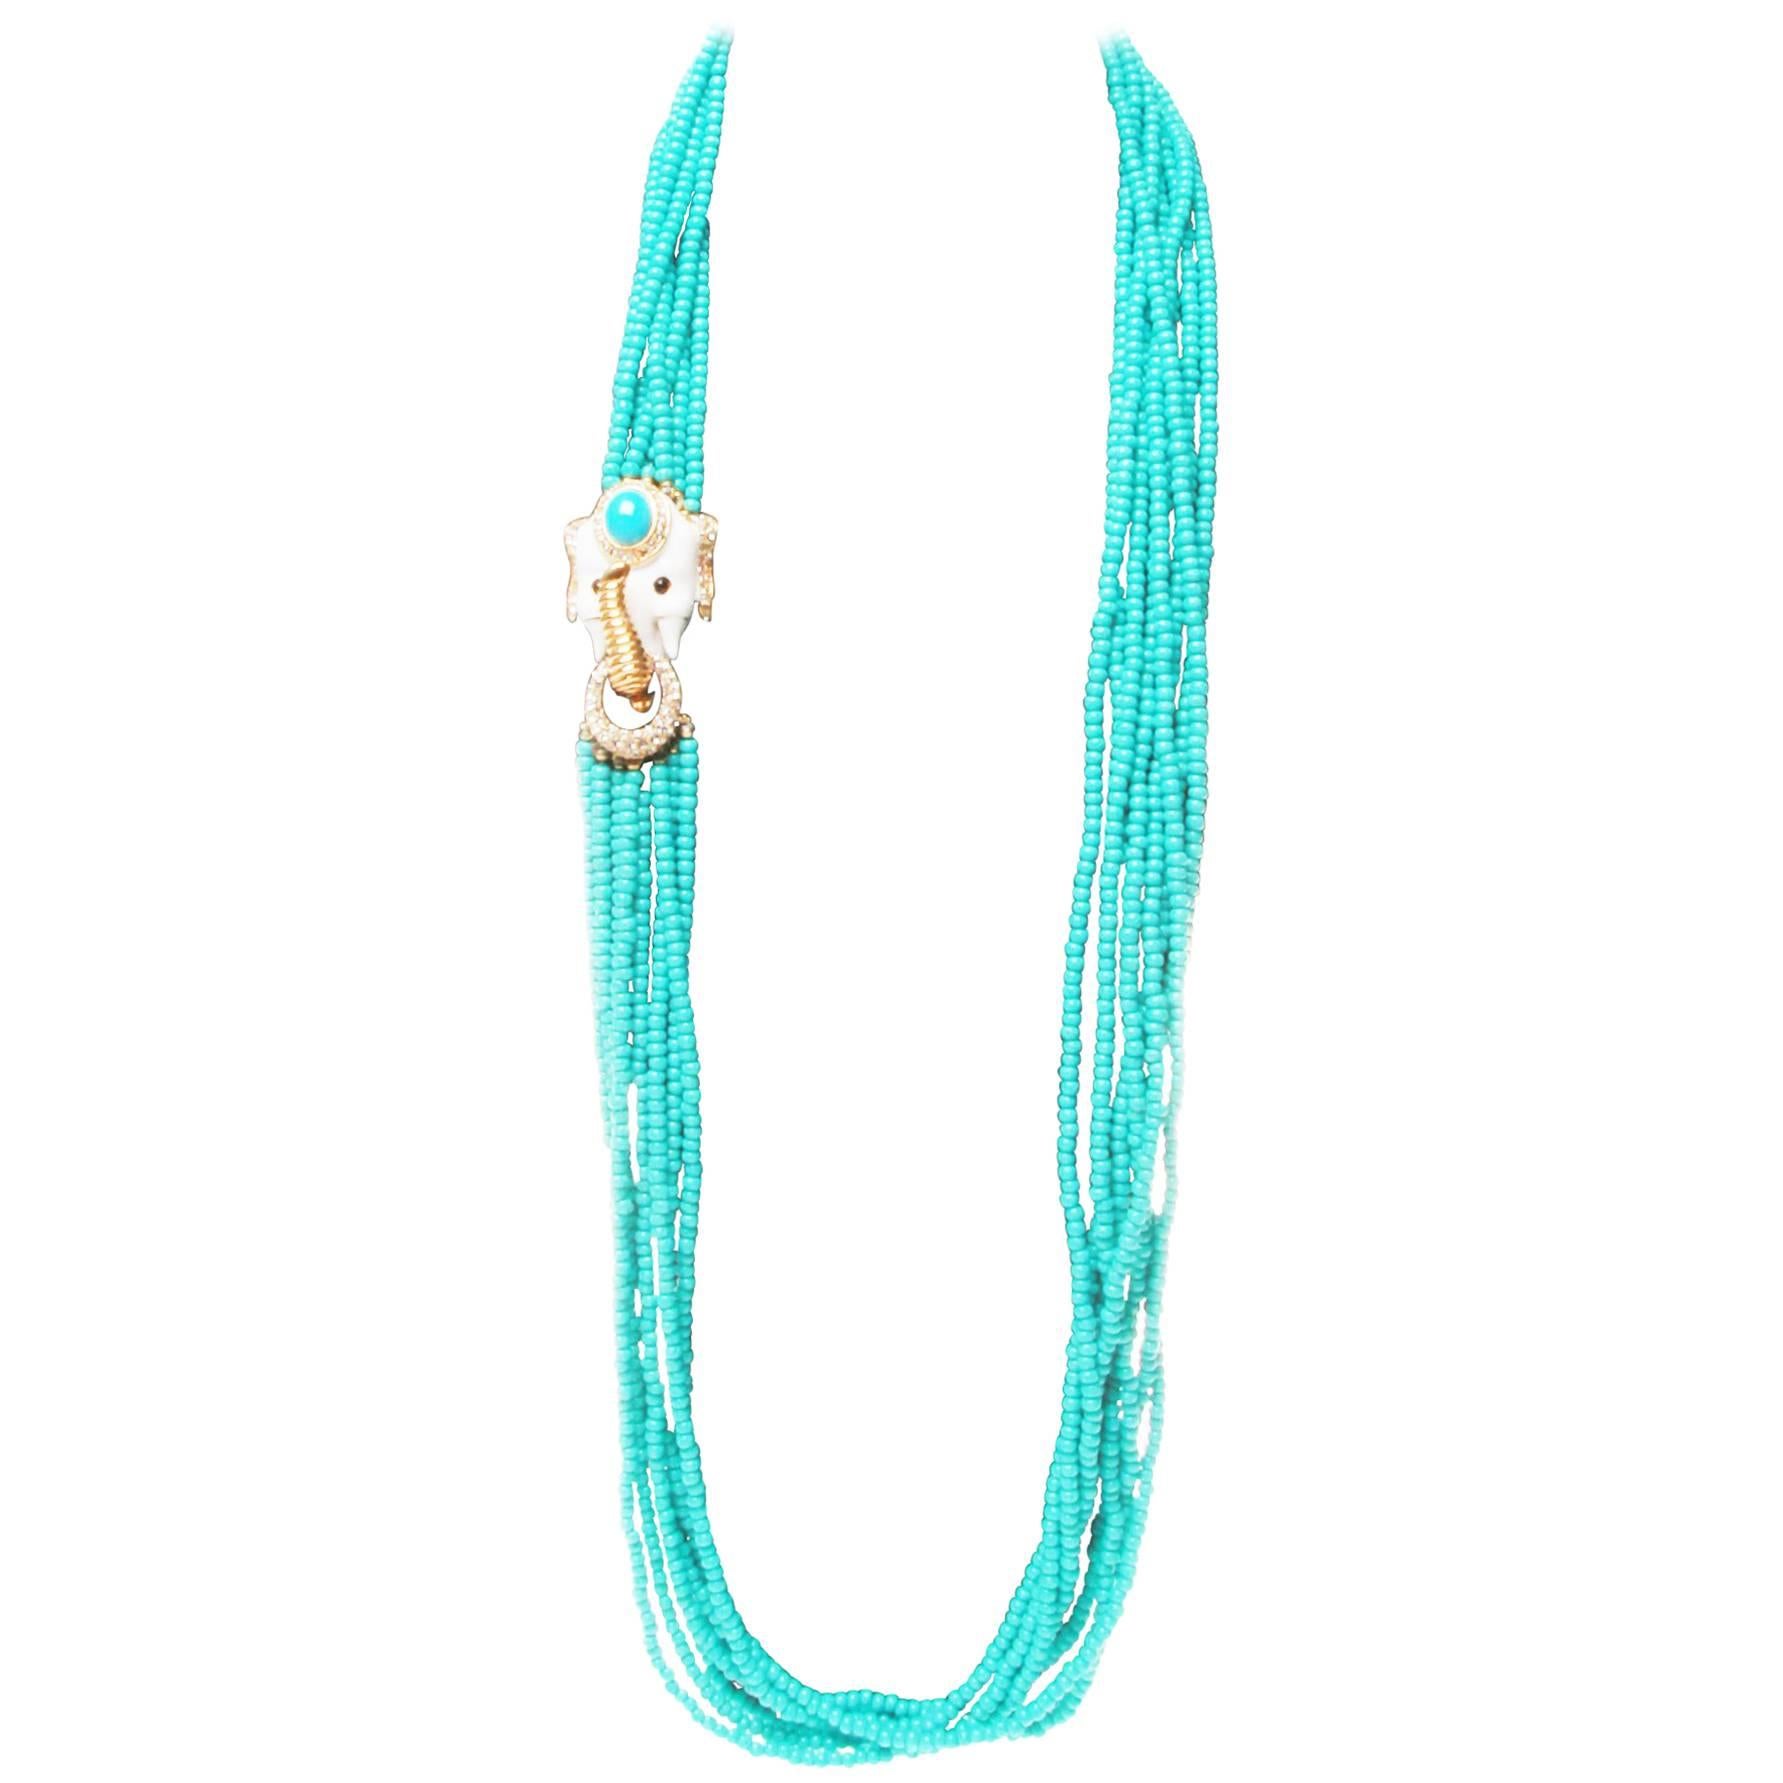 Ciner Turquoise Glass Torsade Necklace with Crystal White Enamel Elephant Clasp